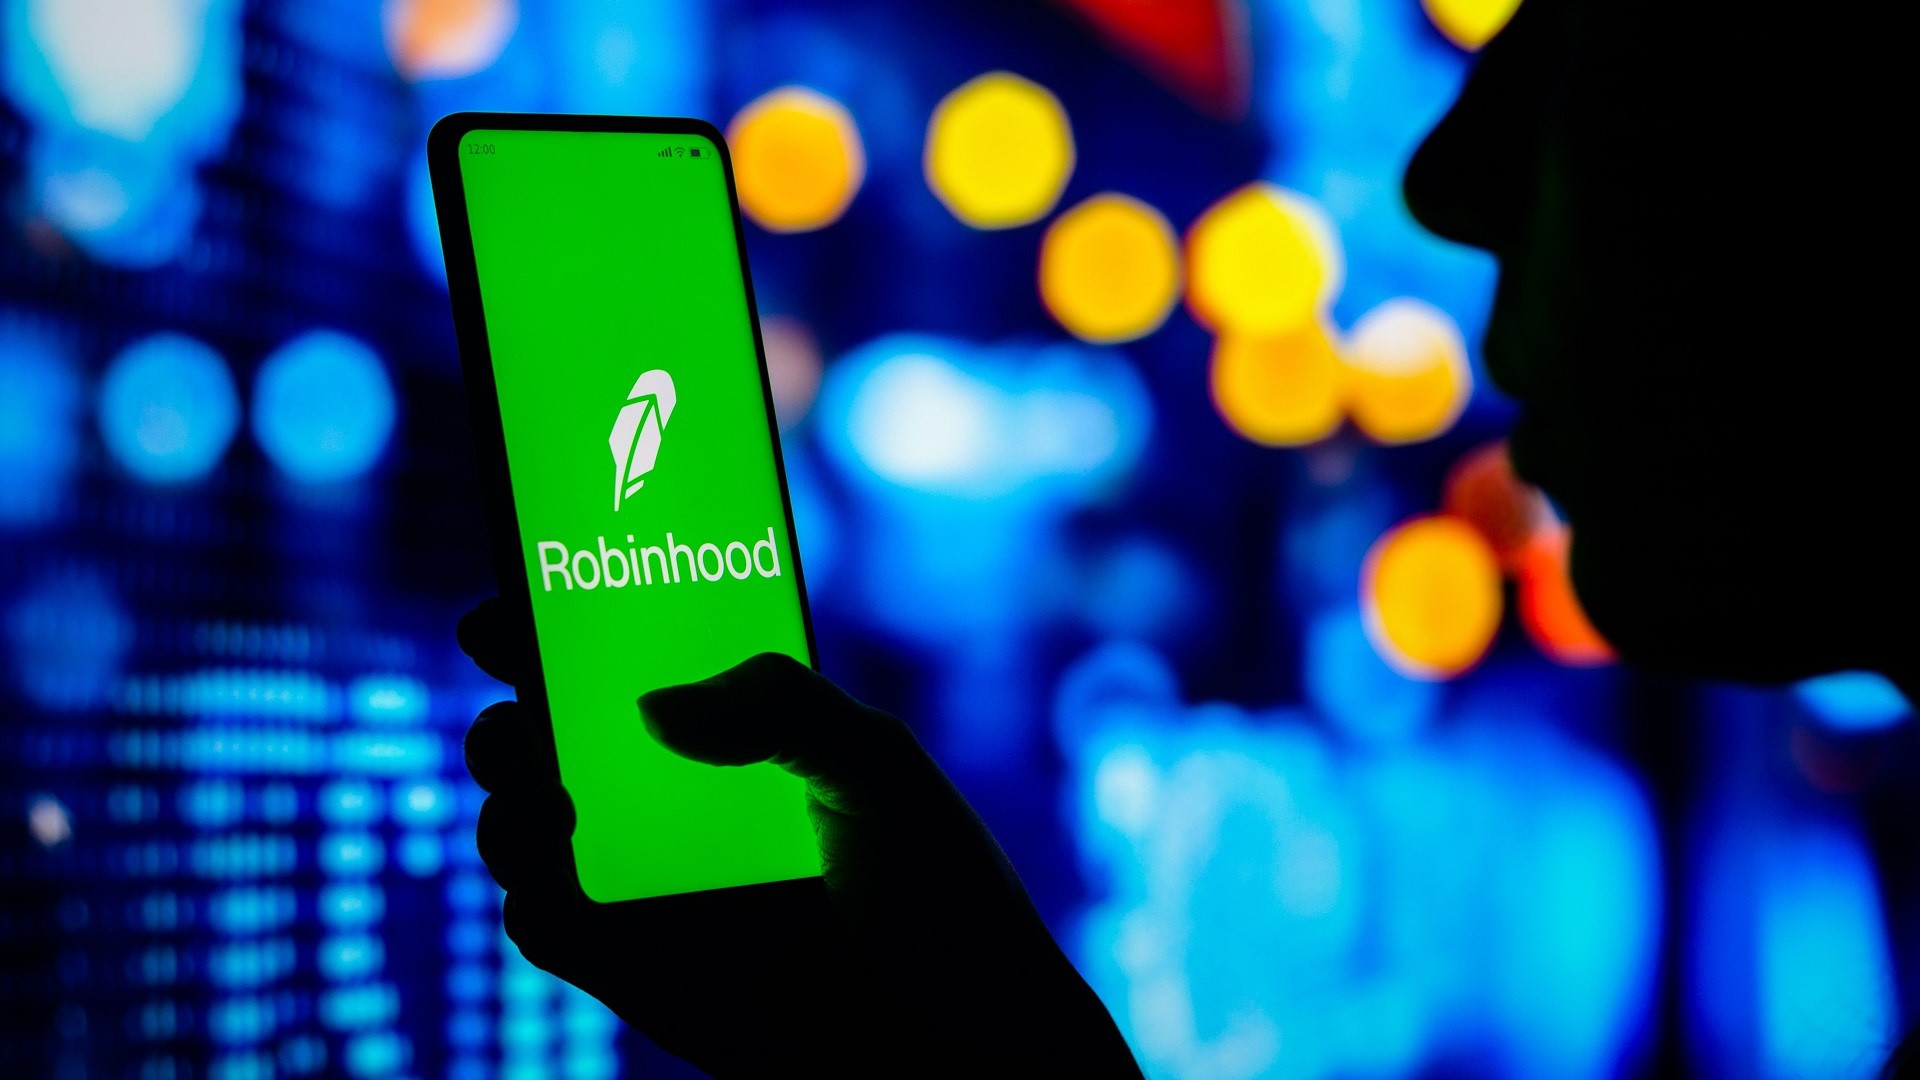 Robinhood’s New Stock Lending Feature Provides ‘Passive Recurring Income’ from Your Investments